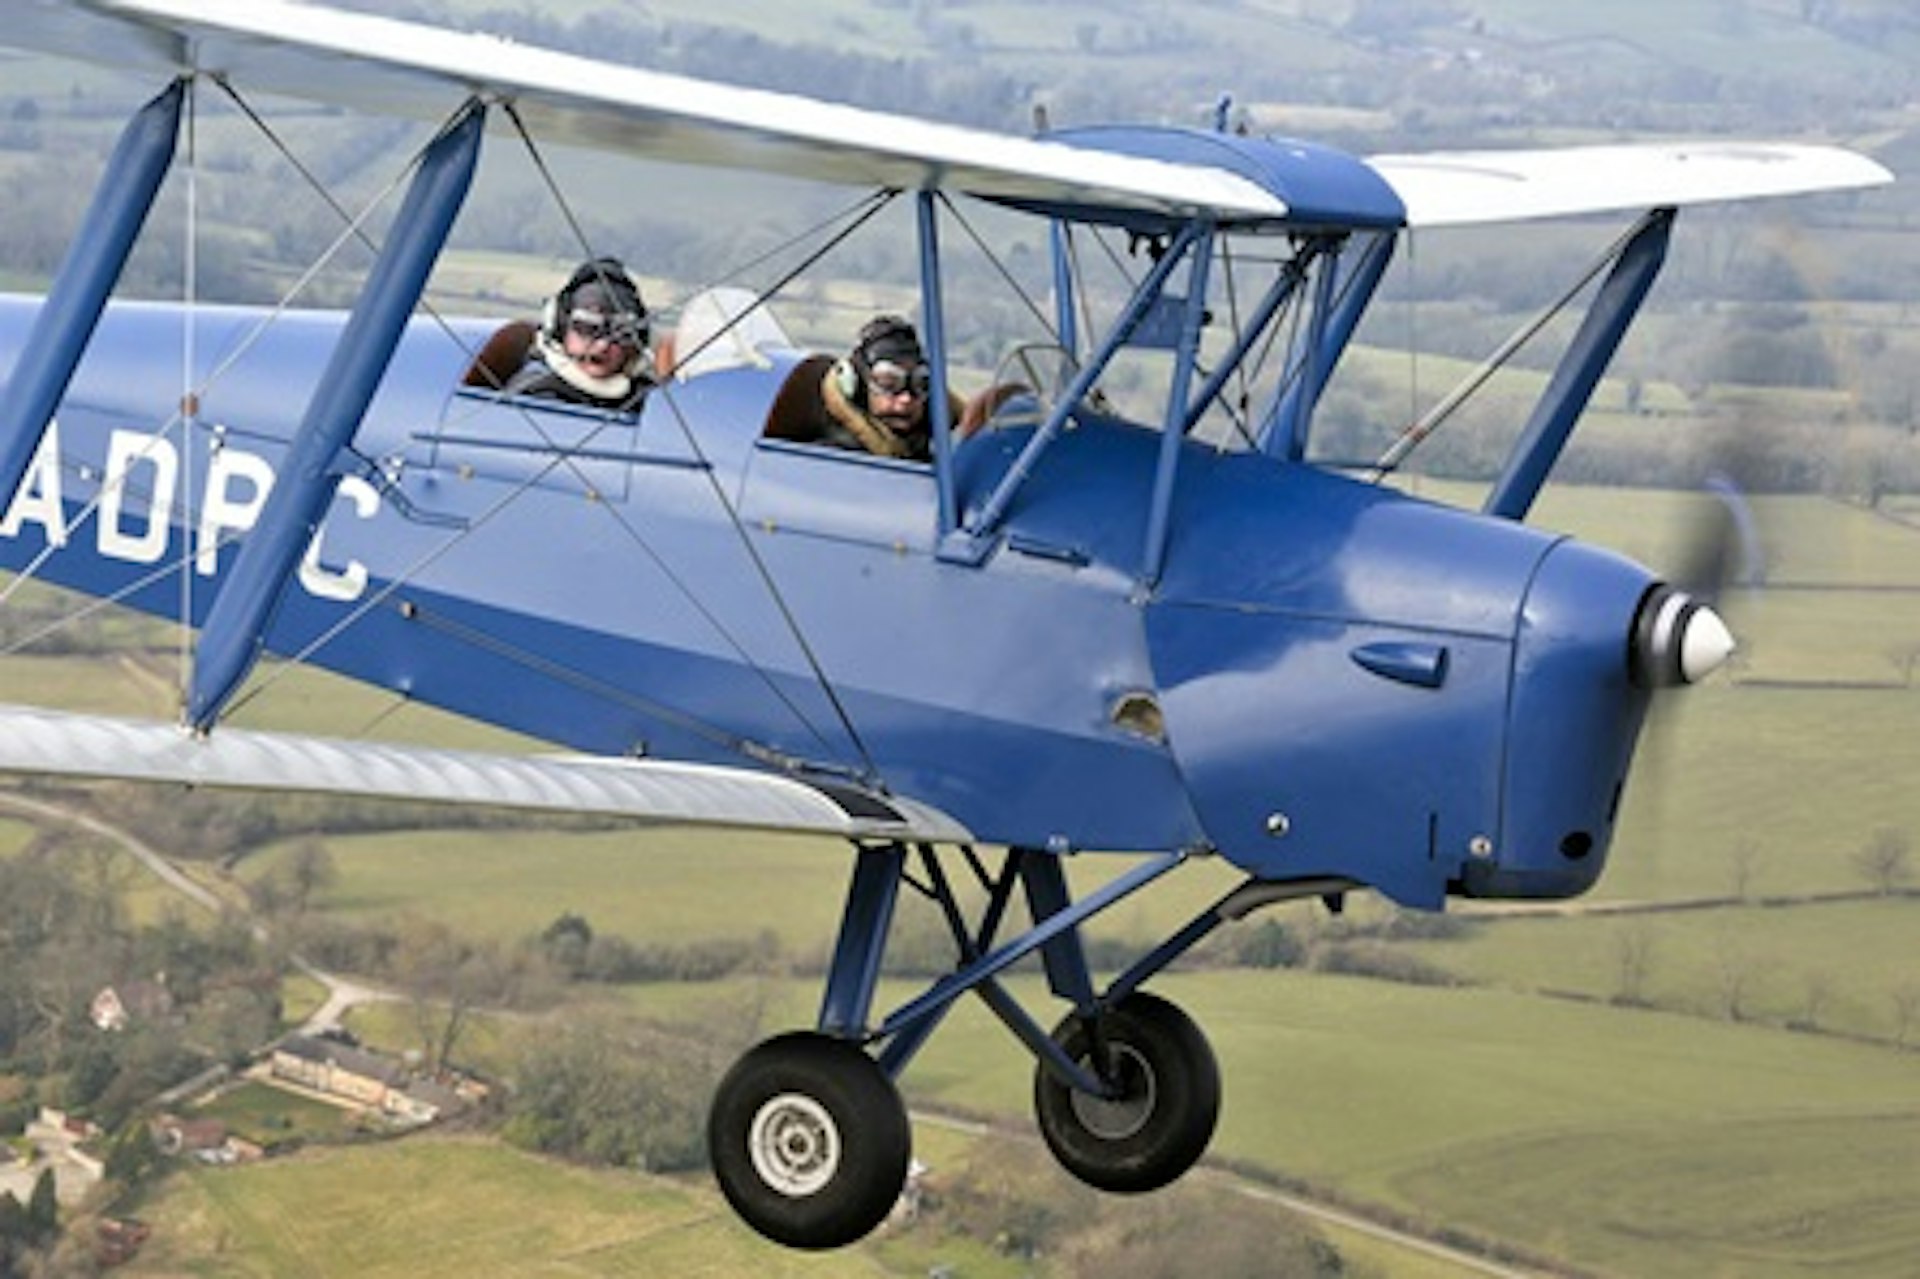 30 minute Tiger Moth Trial Lesson 1